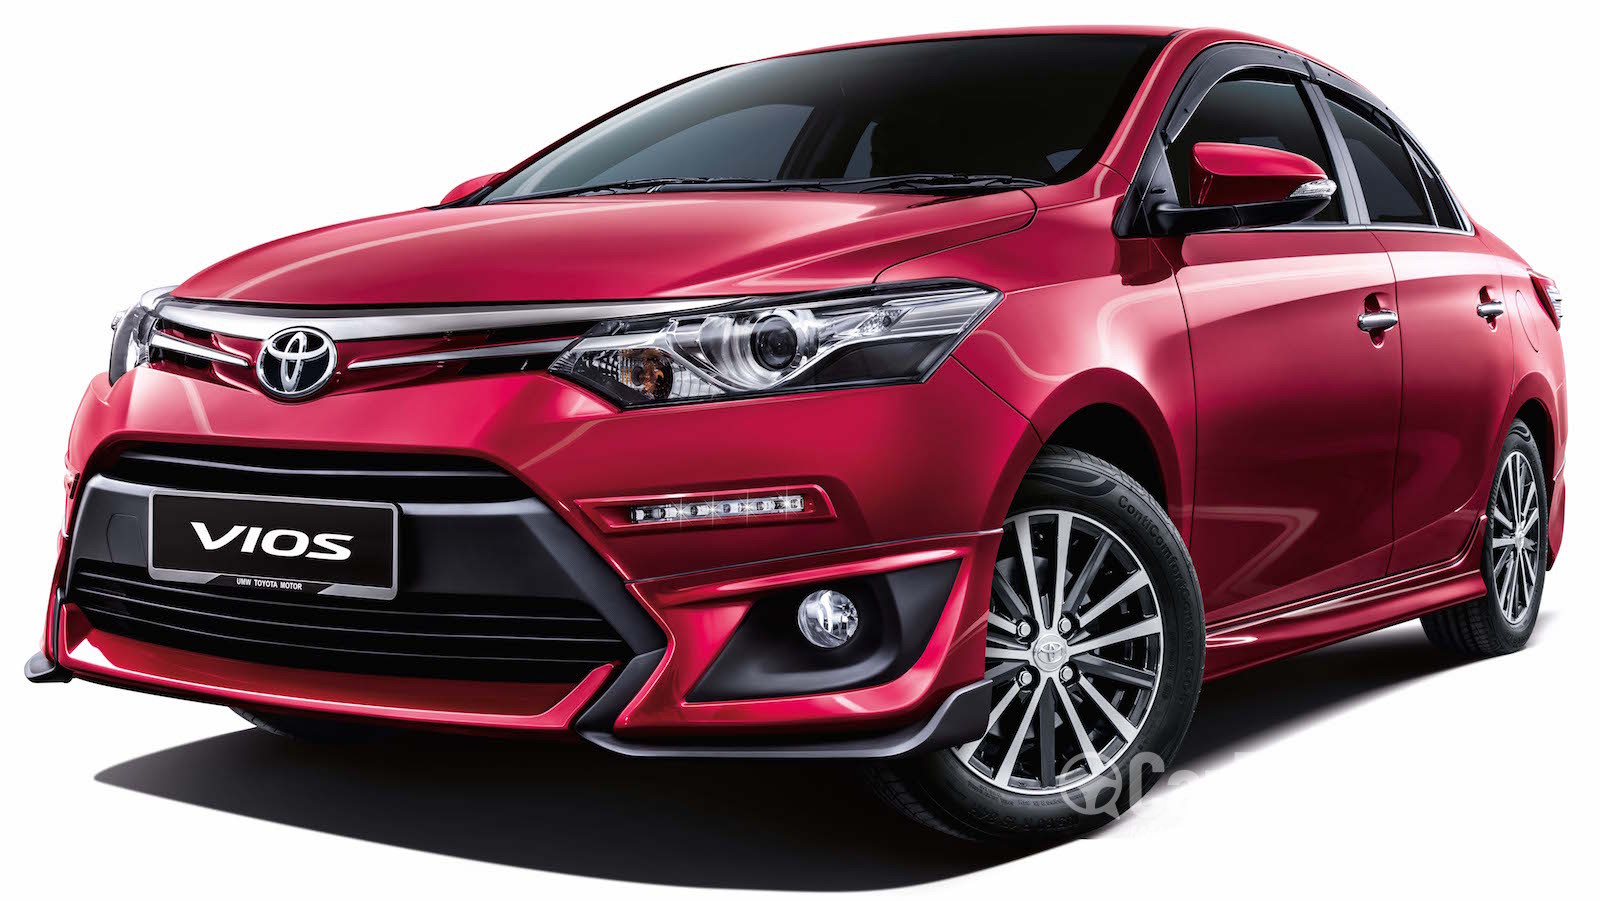 Toyota Vios NSP151 (2016) Exterior Image in Malaysia - Reviews, Specs ...